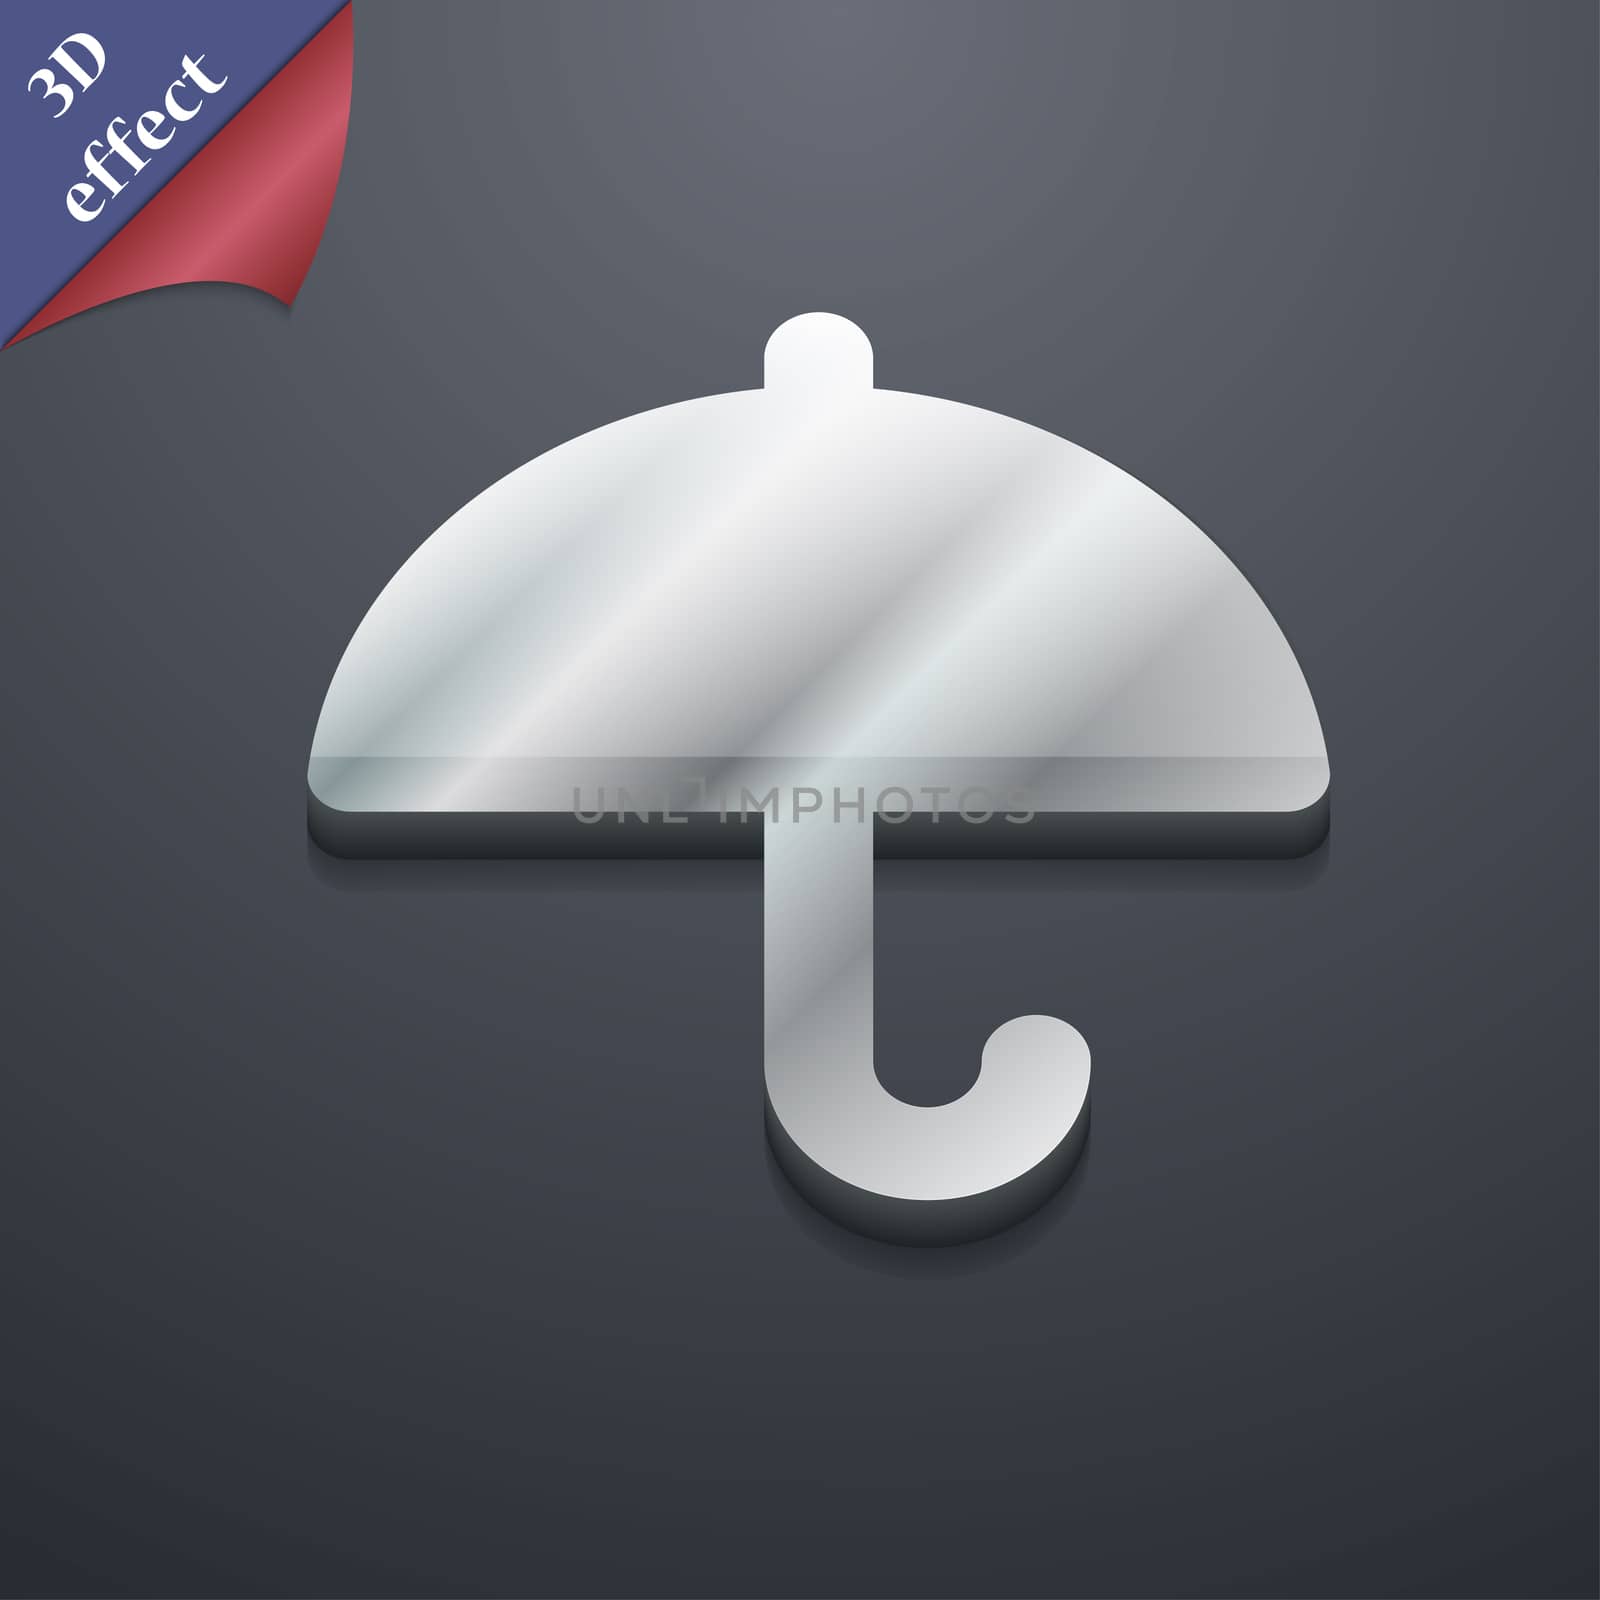 Umbrella icon symbol. 3D style. Trendy, modern design with space for your text illustration. Rastrized copy